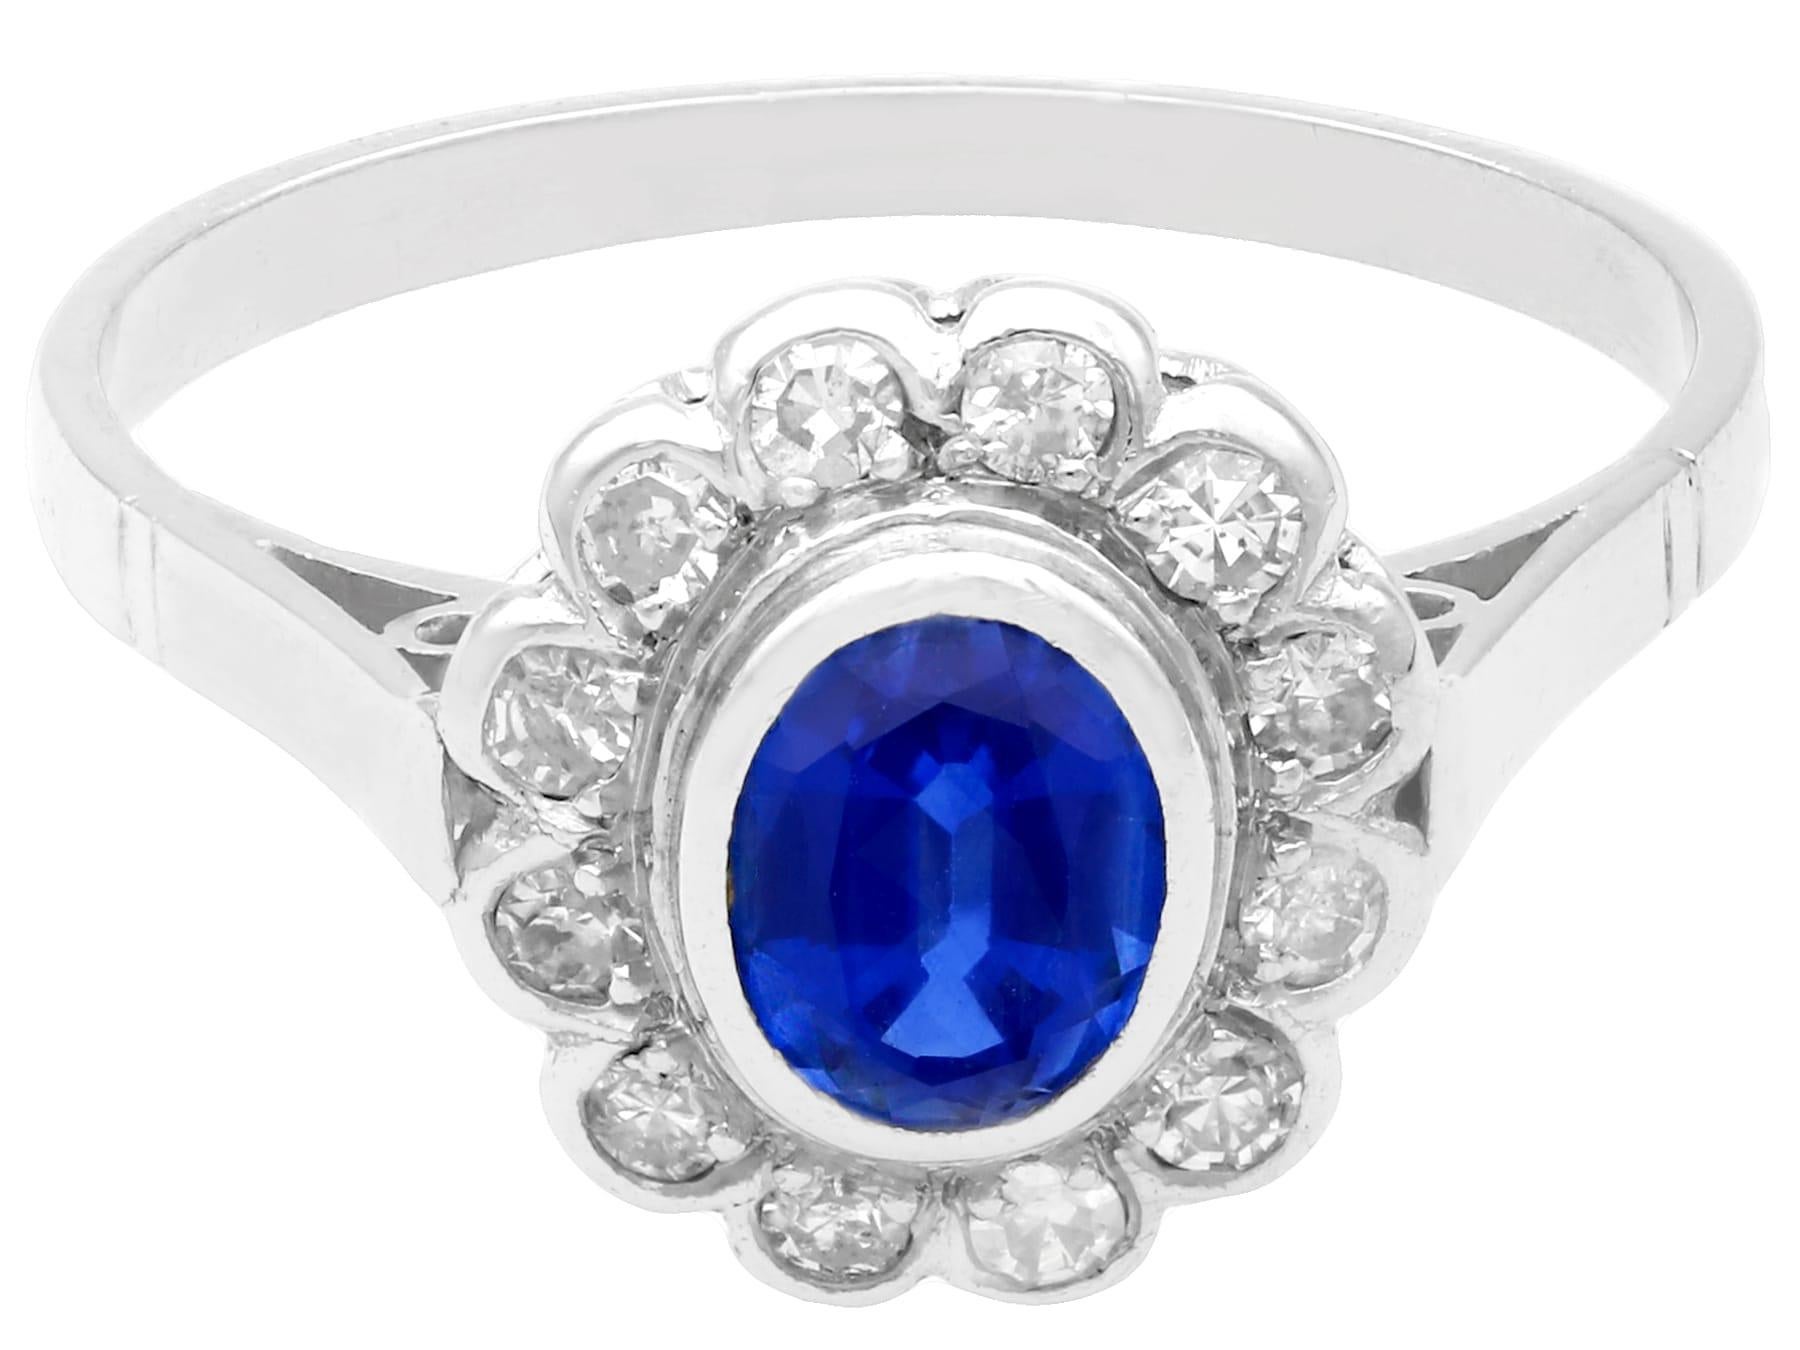 Women's 1.12 Carat Oval Cut Sapphire and Diamond Platinum Cluster Ring Circa 1930 For Sale